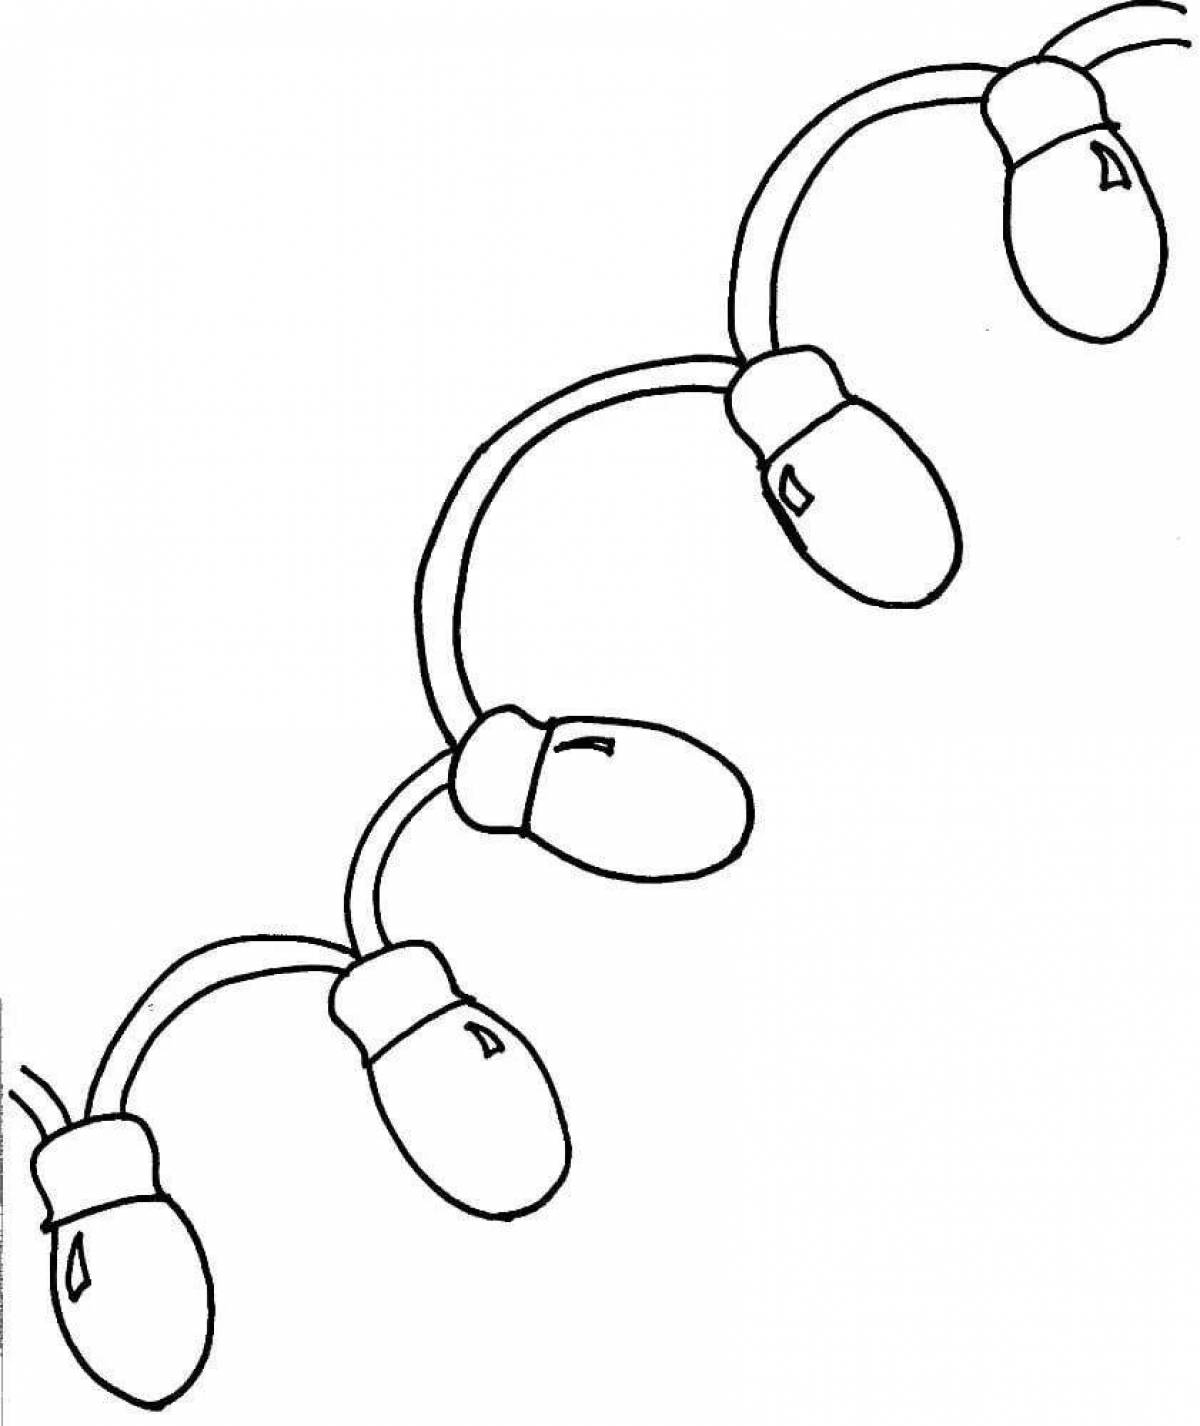 Playful garland coloring page for kids